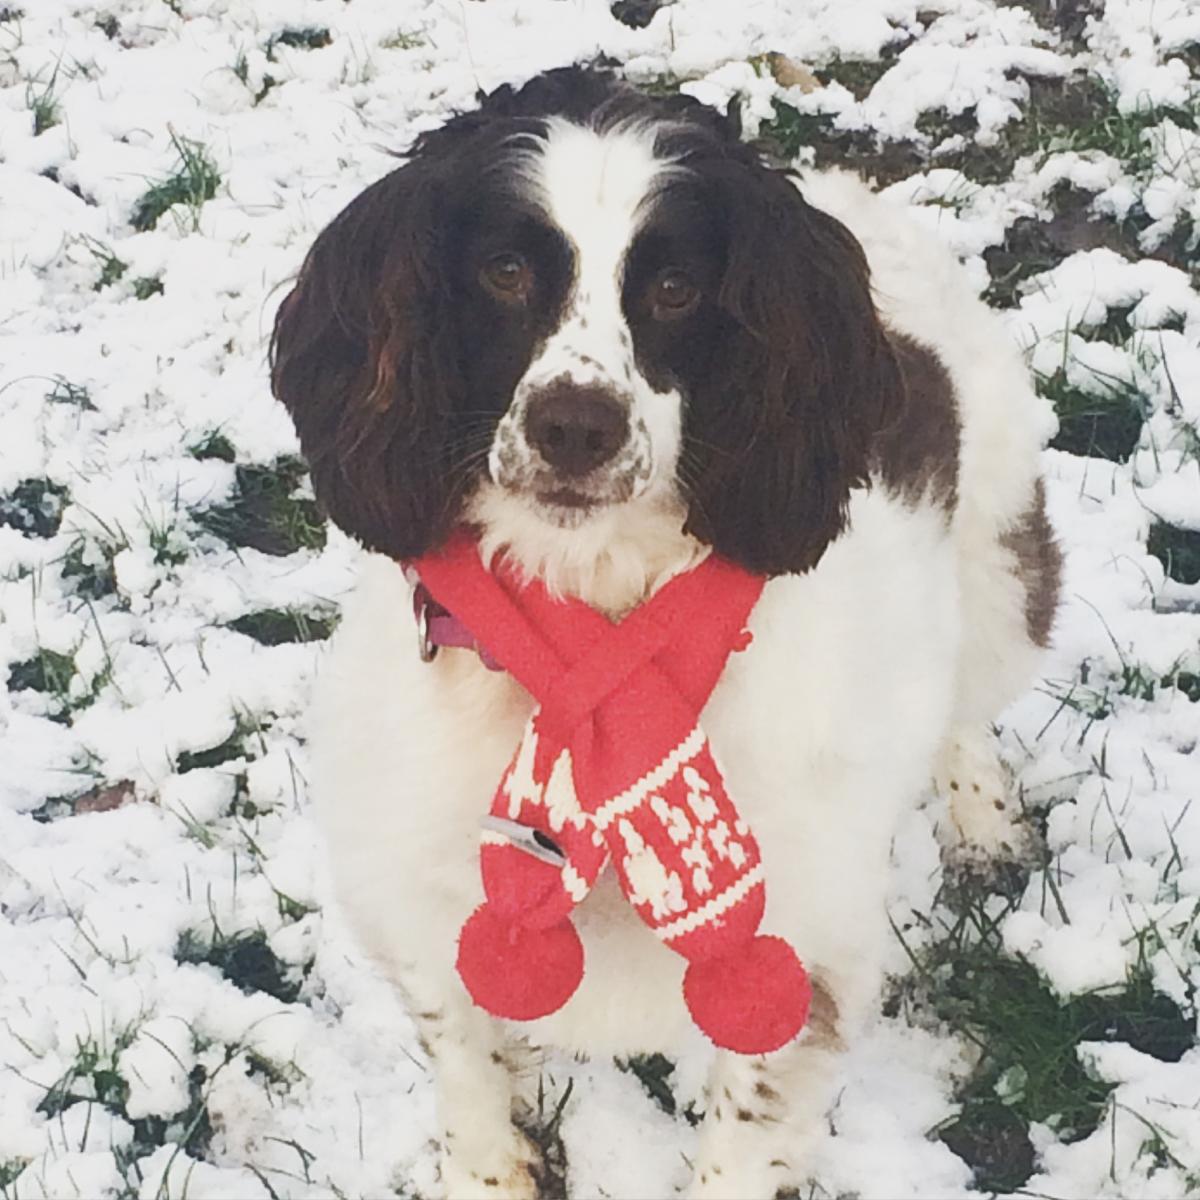 Julie Millward from Darlington sent in this picture of her  dog, Peggy